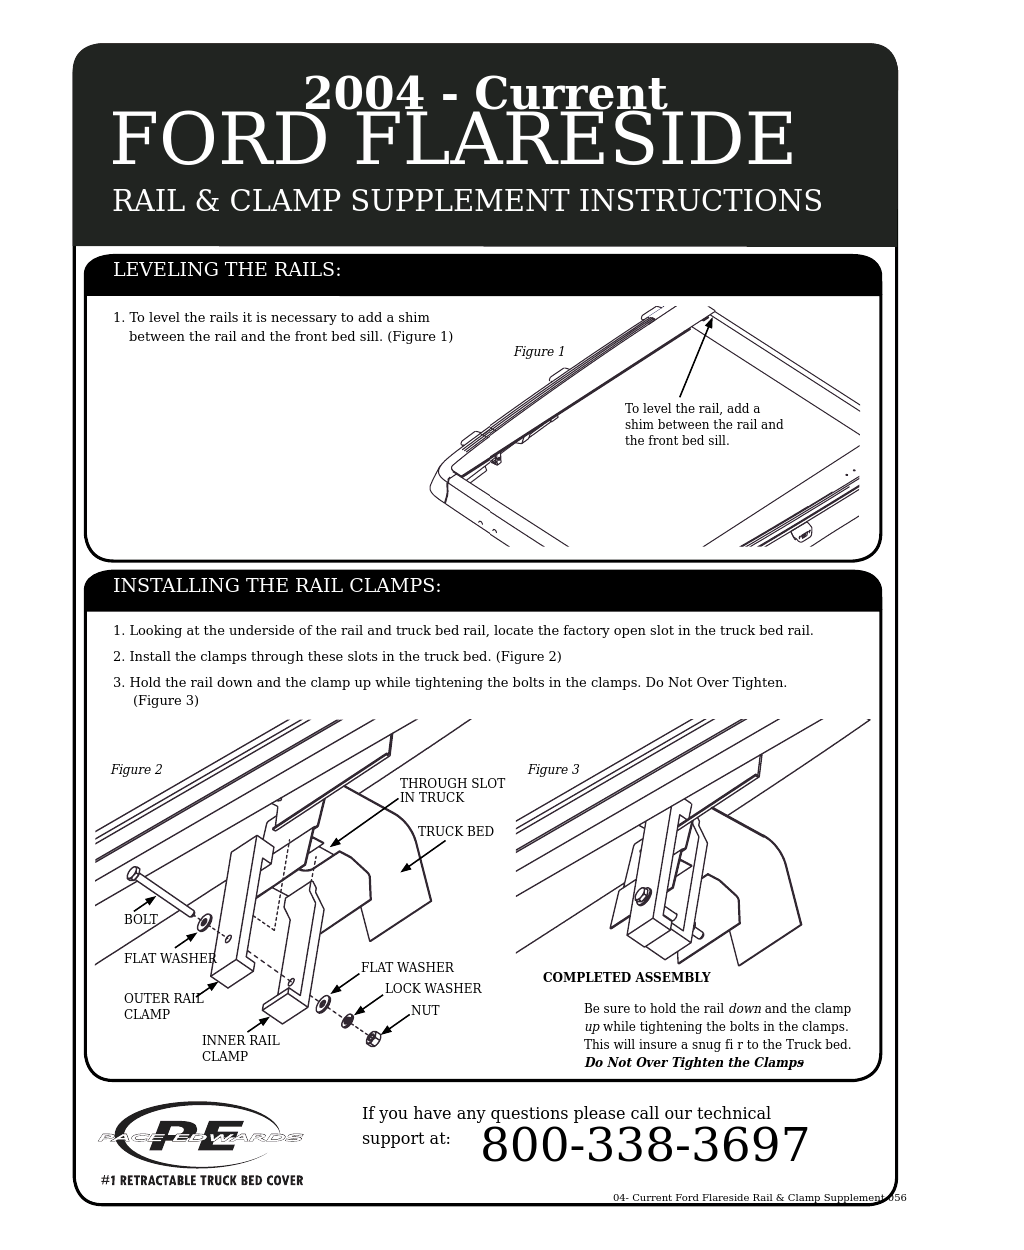 2004 Ford Flareside Clamp Supplement